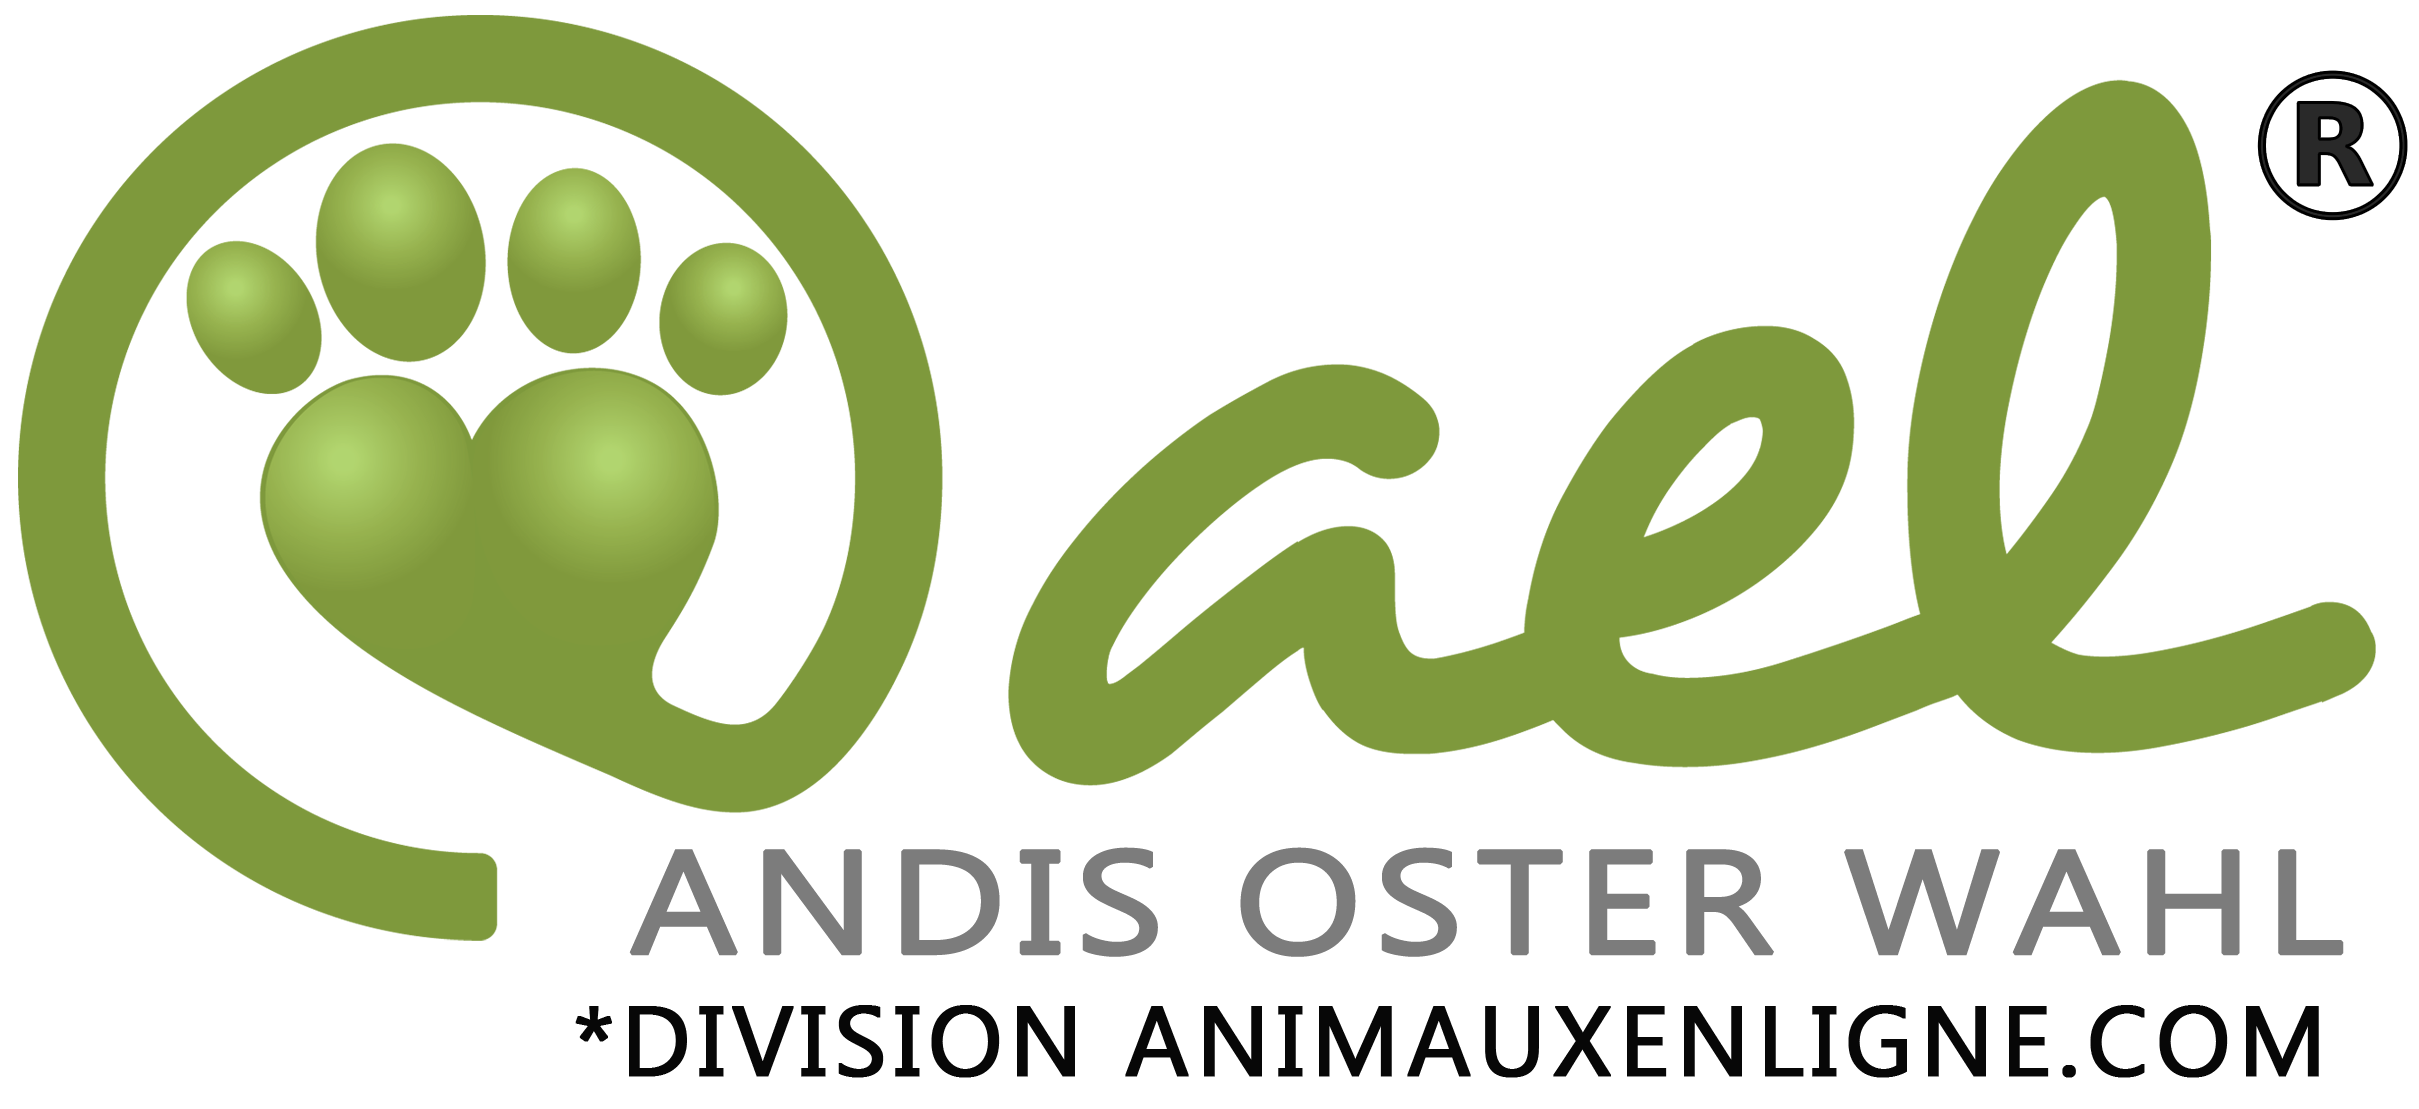 andis oster wahl logo